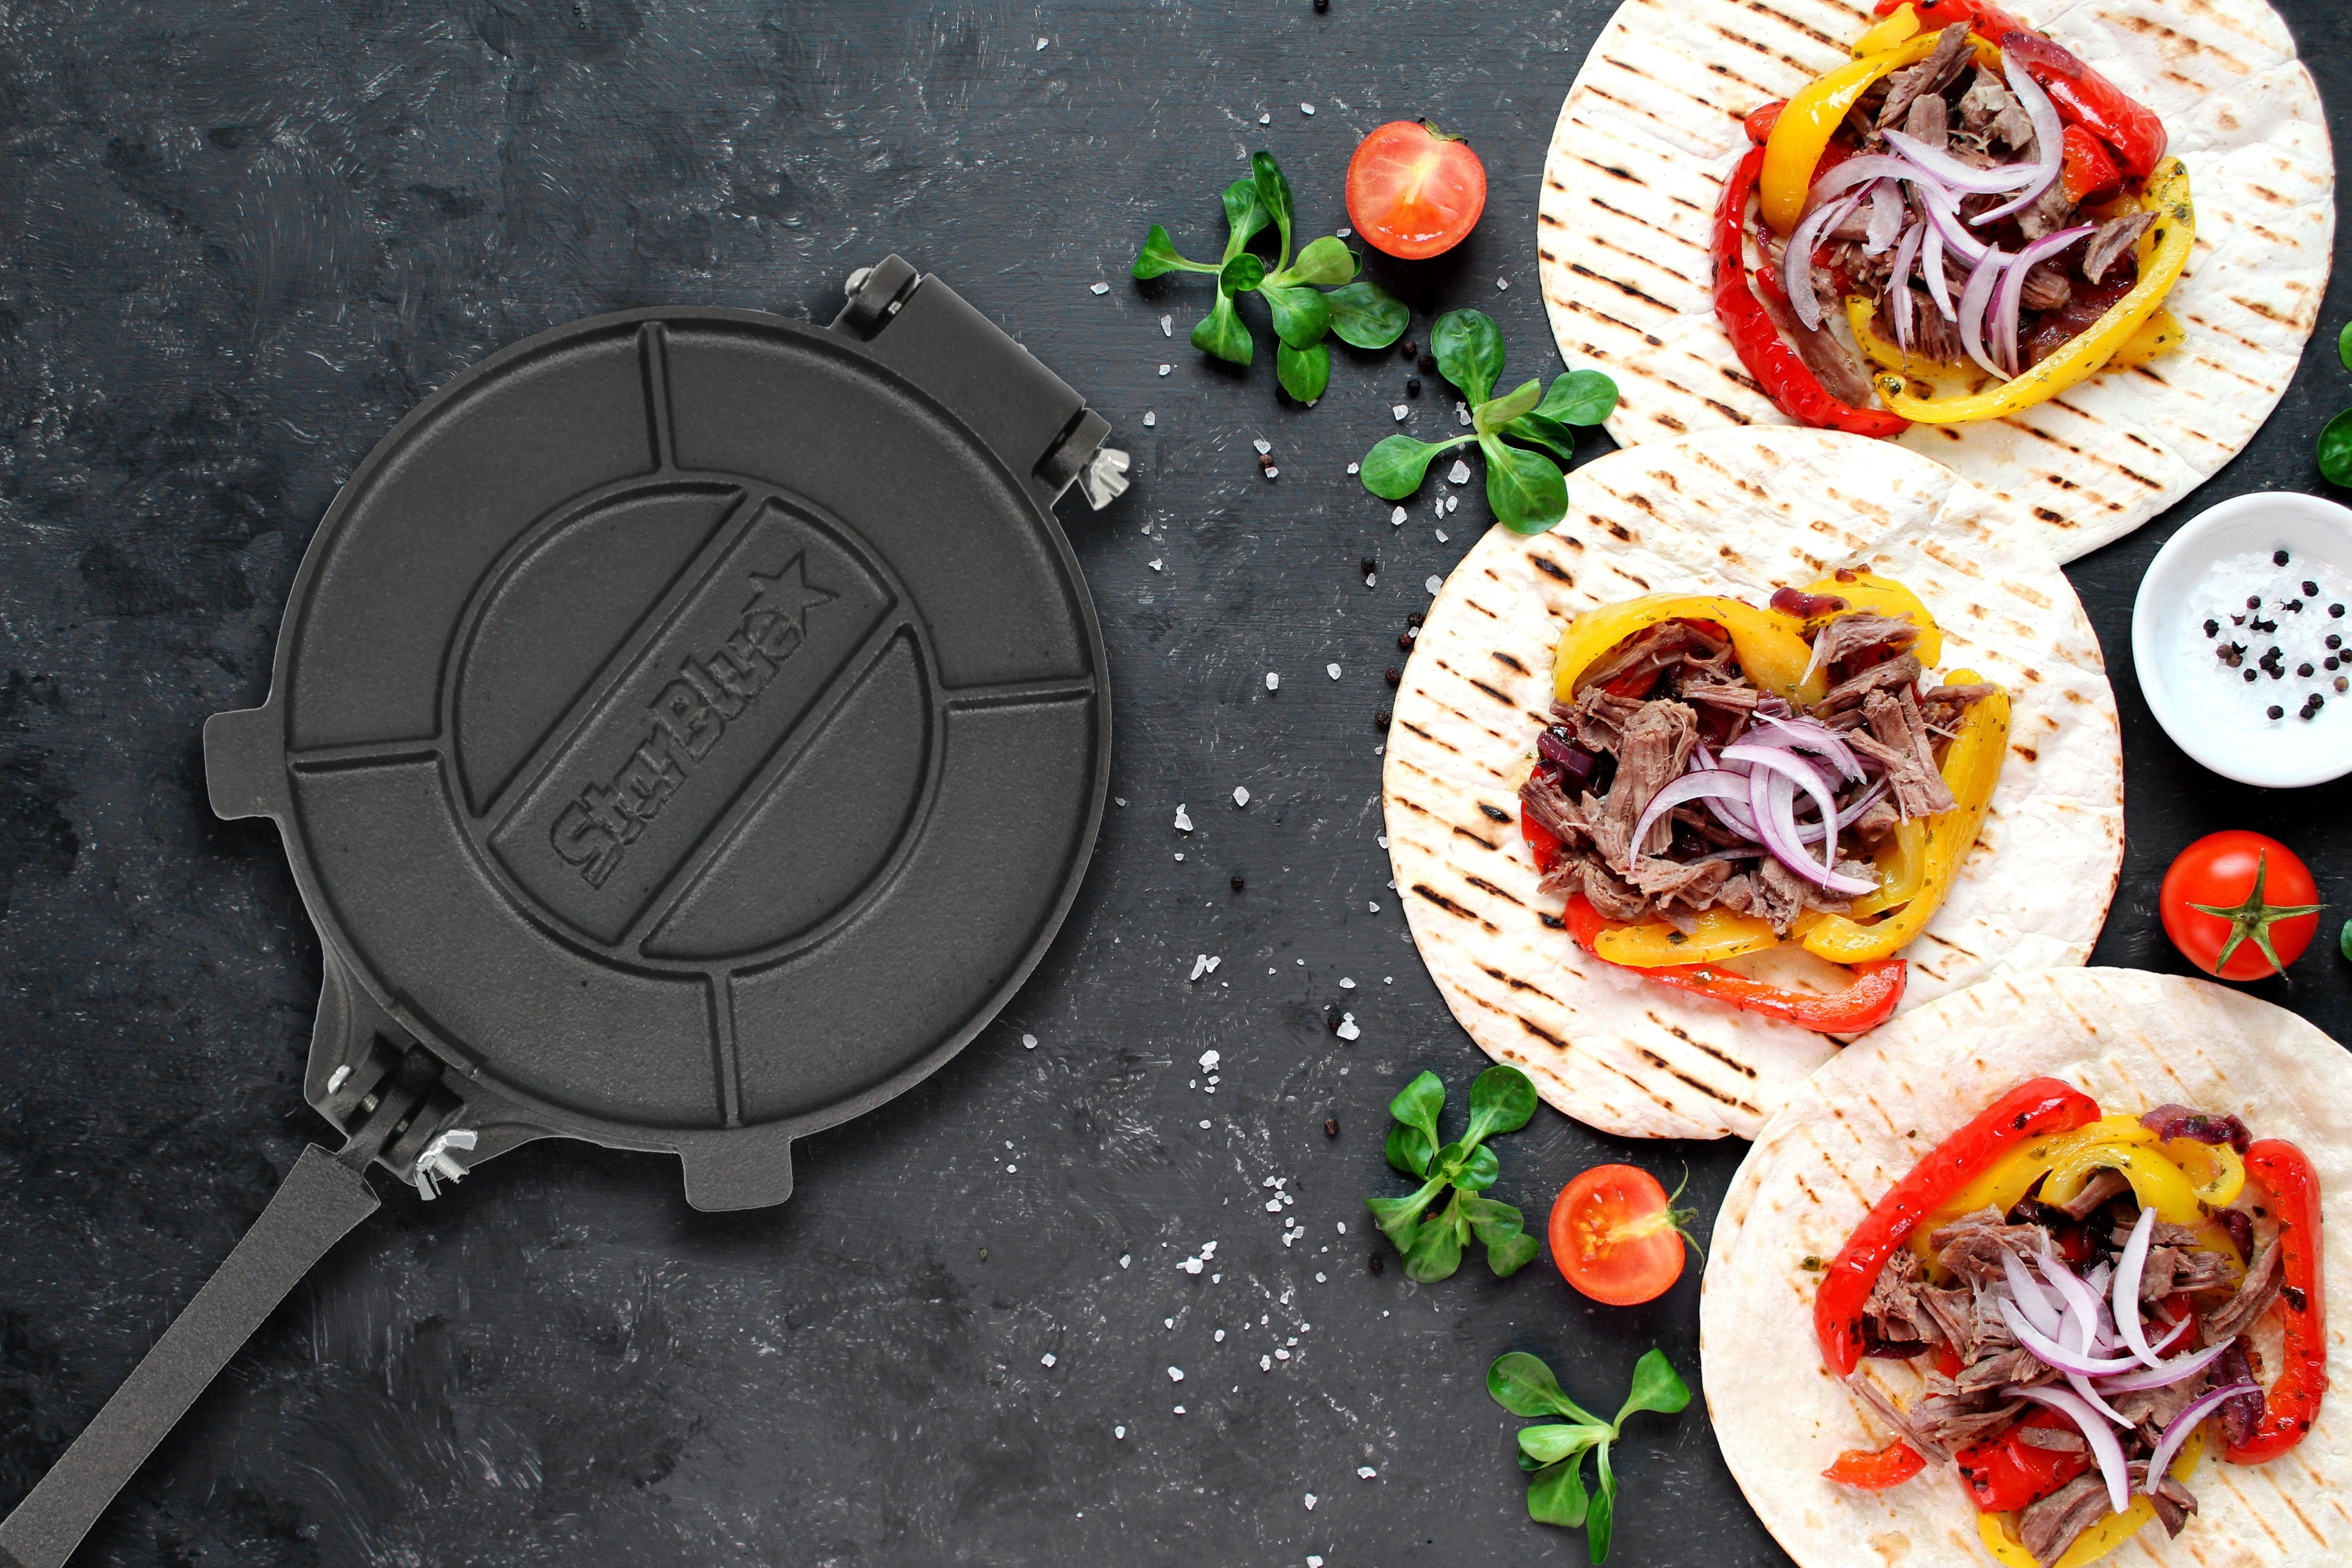 8 inch Cast Iron Tortilla Press by StarBlue with Free 100 Pieces Oil Paper and Recipes E-Book - Tool to Make Indian Style Chapati, Tortilla, Roti